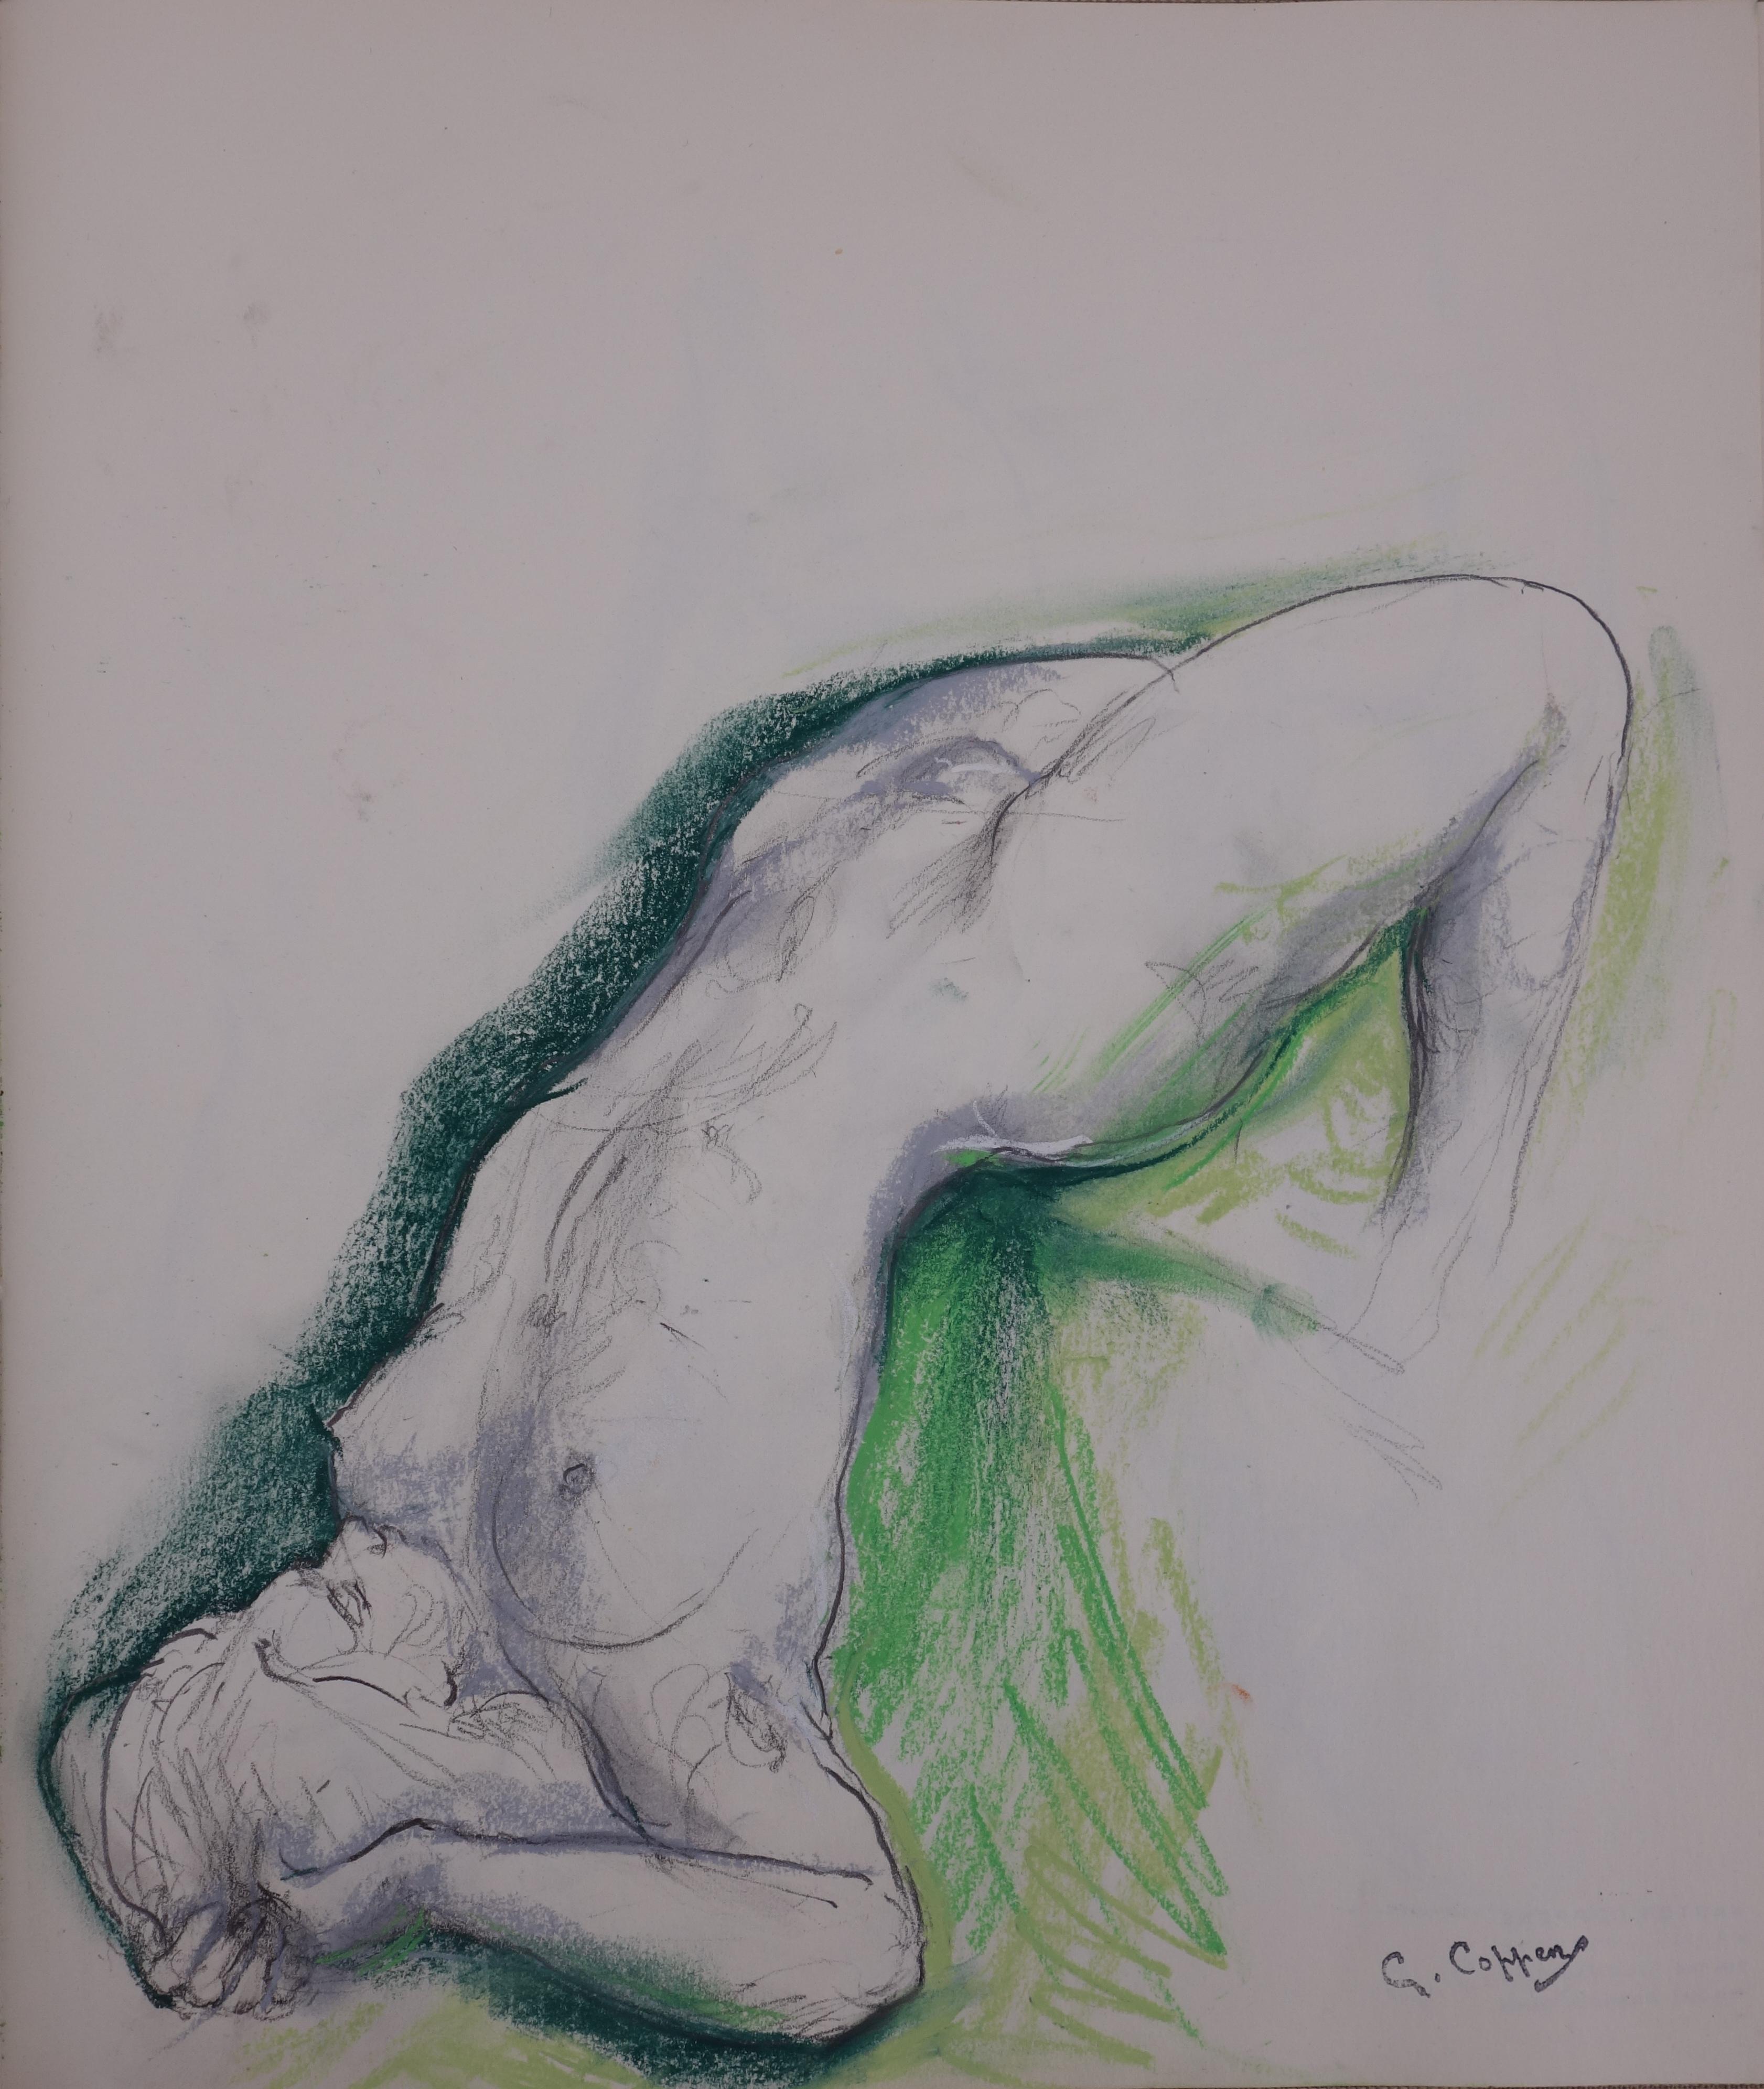 Gaston Coppens Nude - Streching Model - Original charcoals drawing